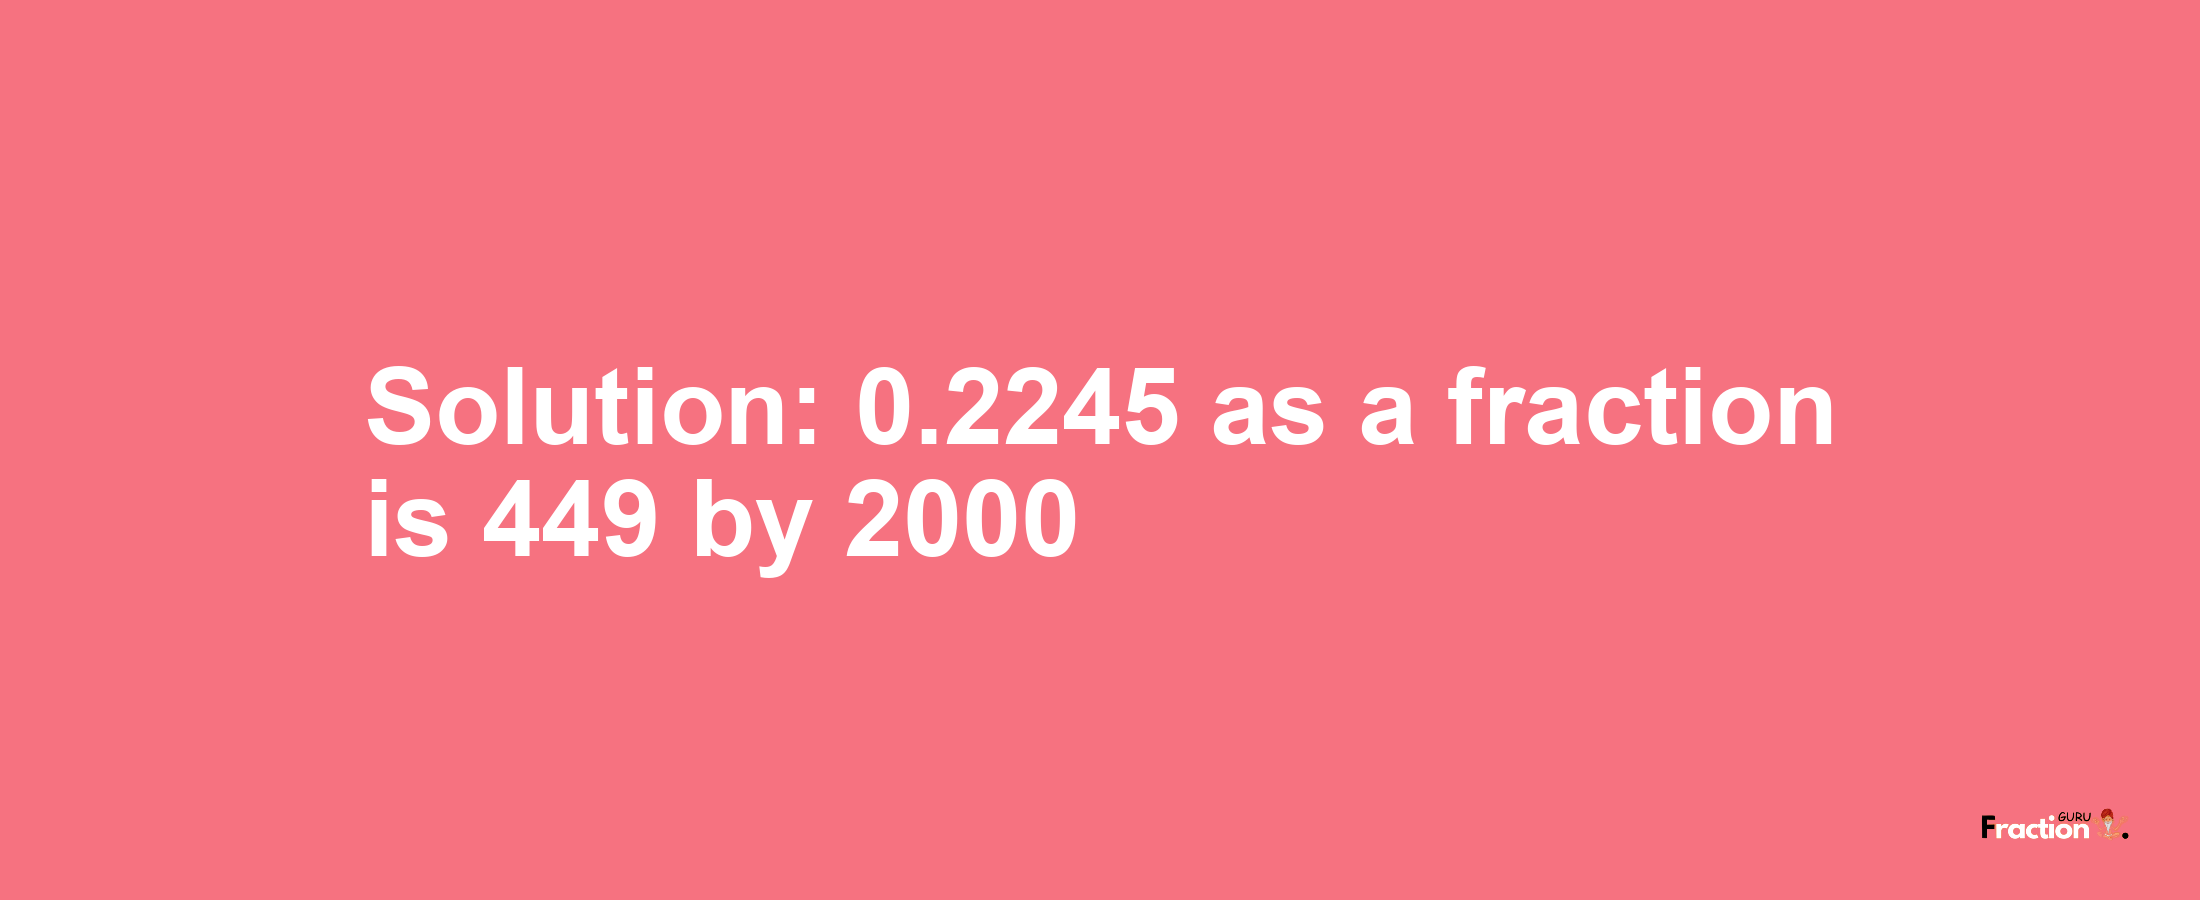 Solution:0.2245 as a fraction is 449/2000